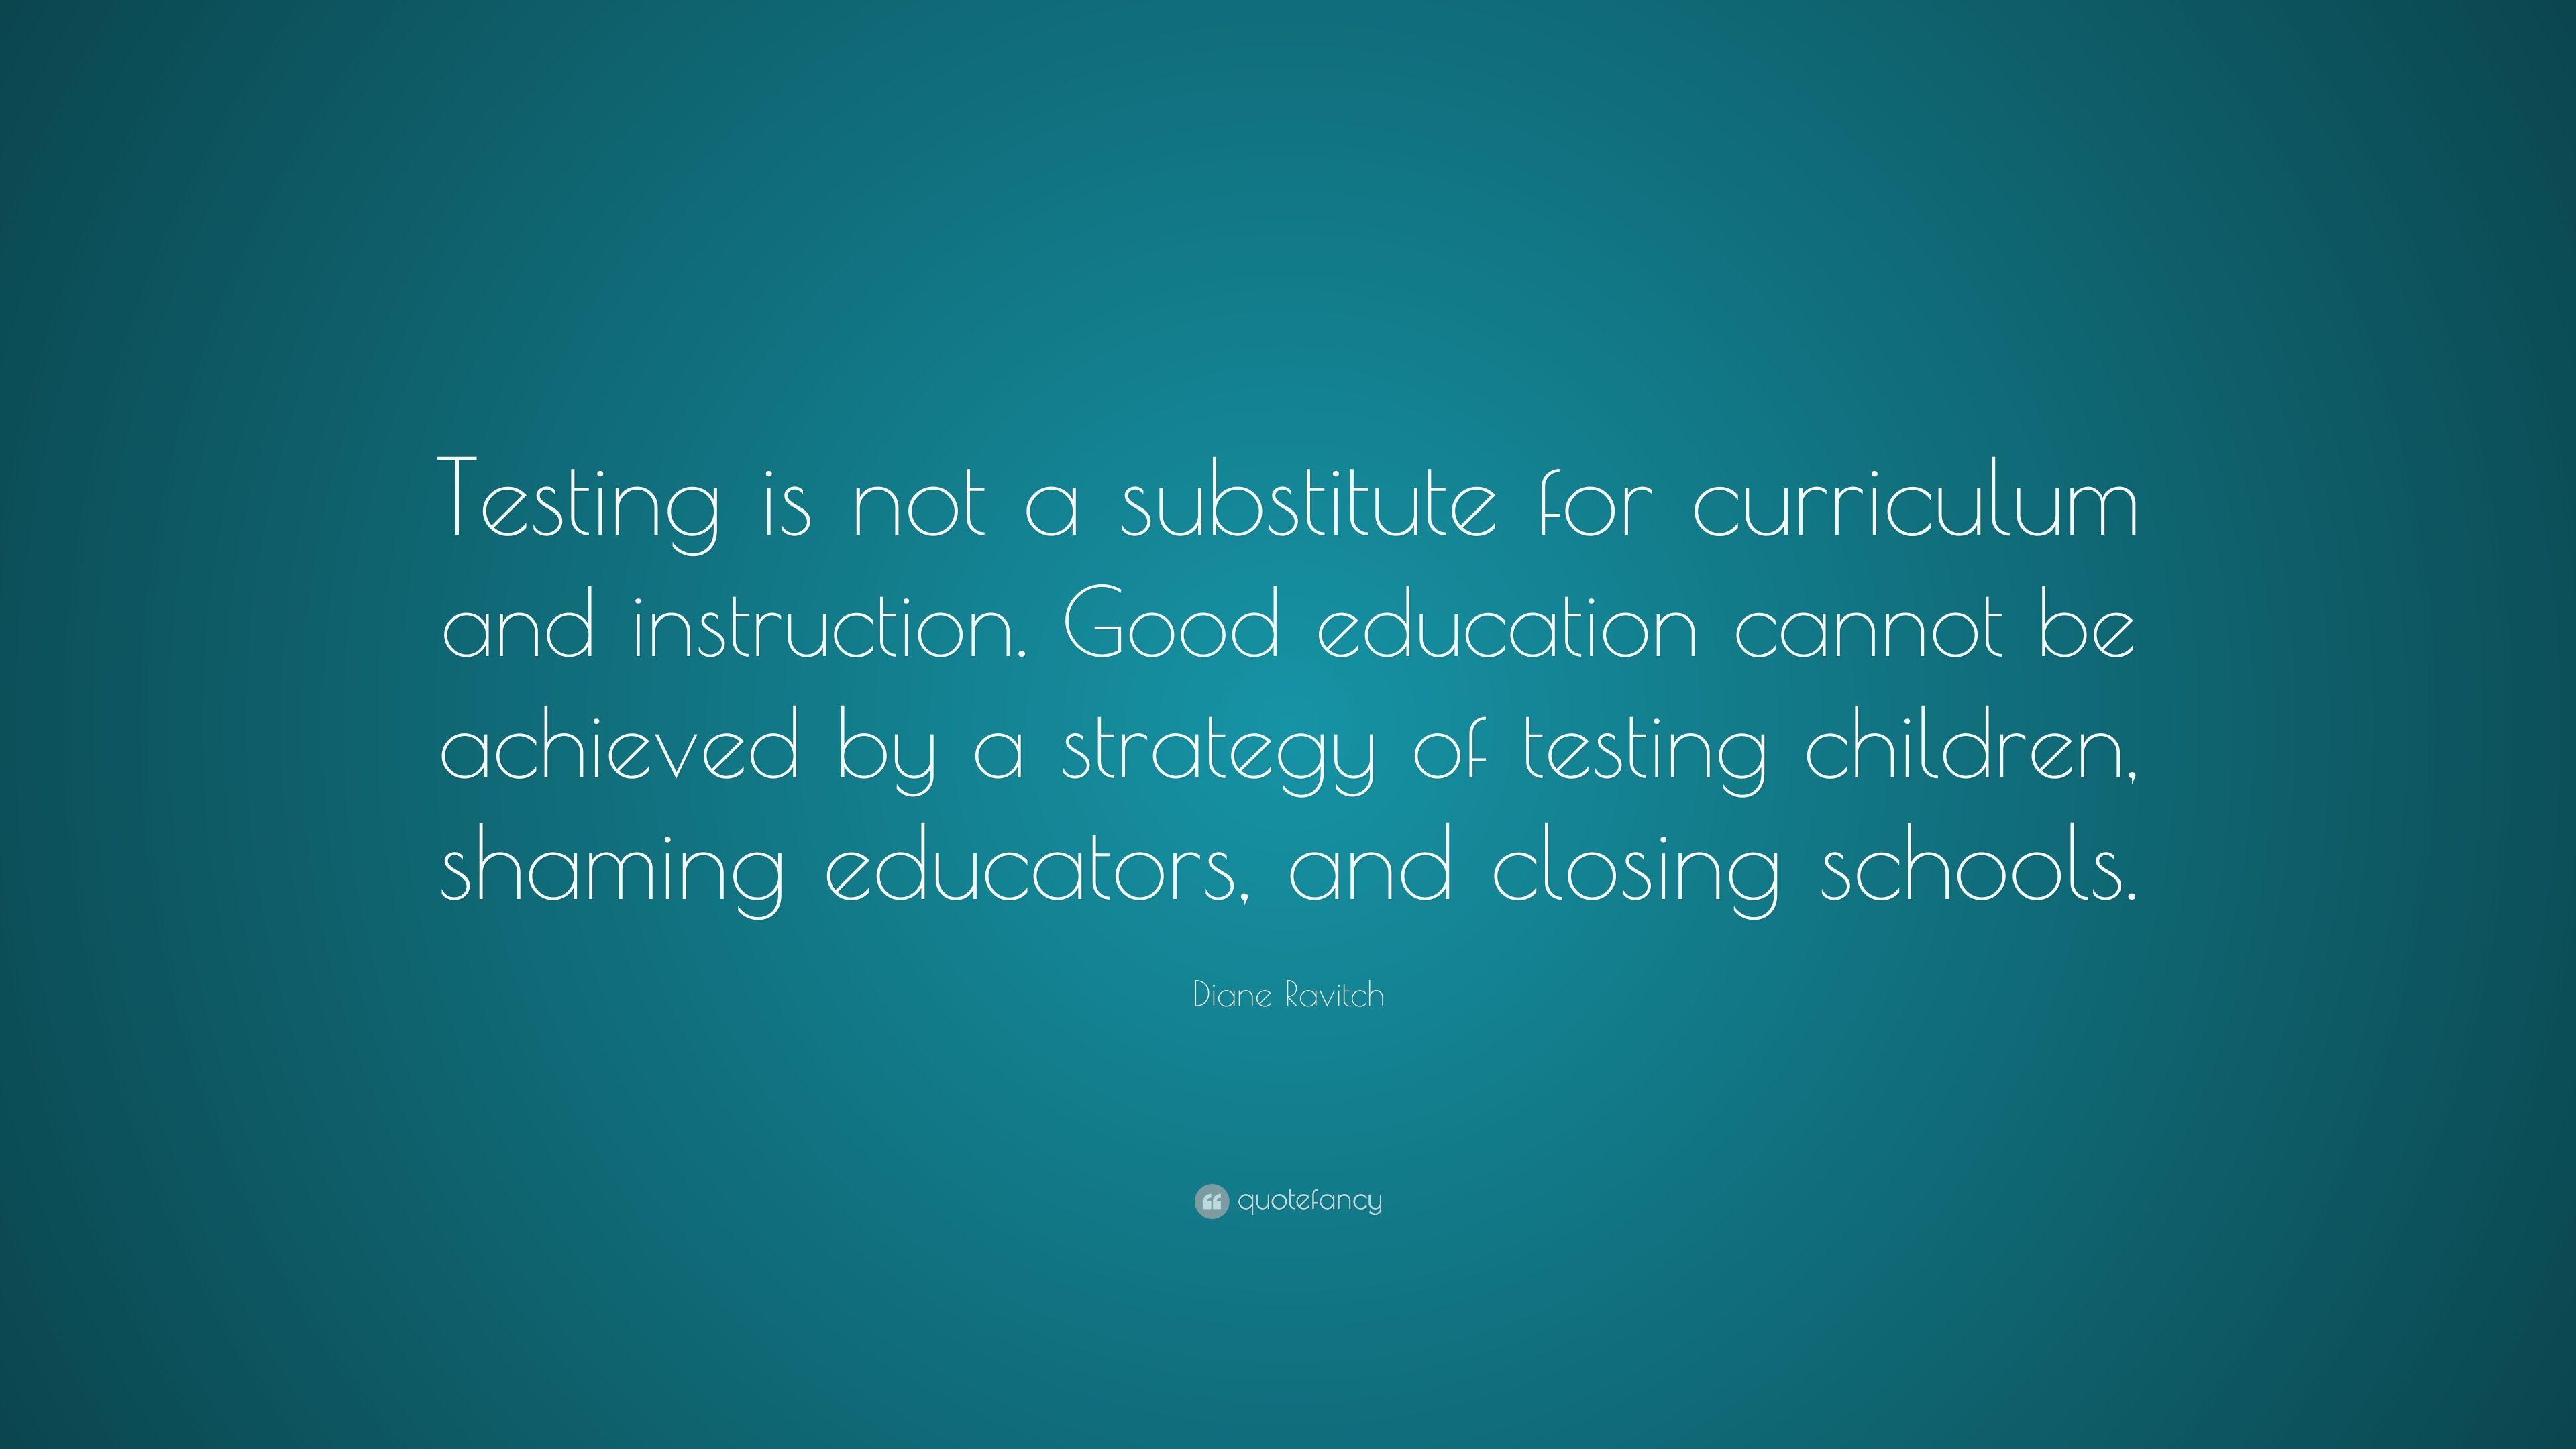 Diane Ravitch Quote: “Testing is not a substitute for curriculum